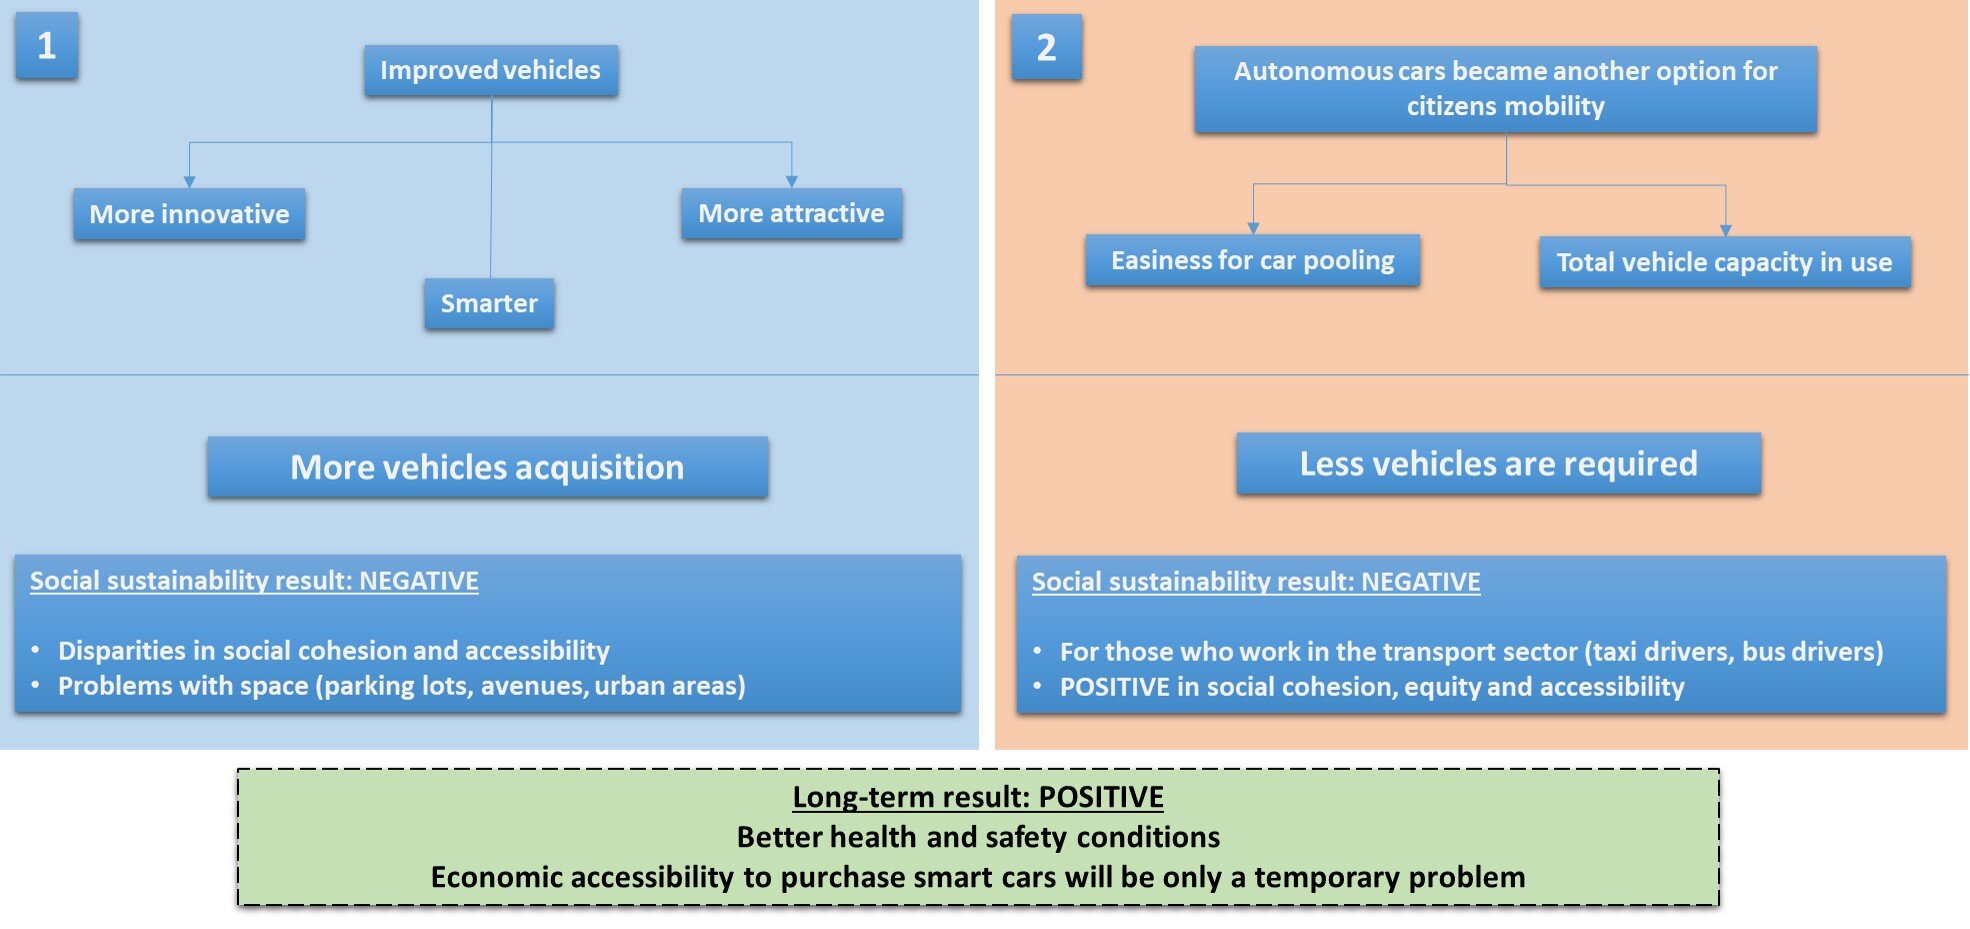 Figure 1. Social scenarios for the development of intelligent mobility (Own elaboration with information from Jekkel, 2017).